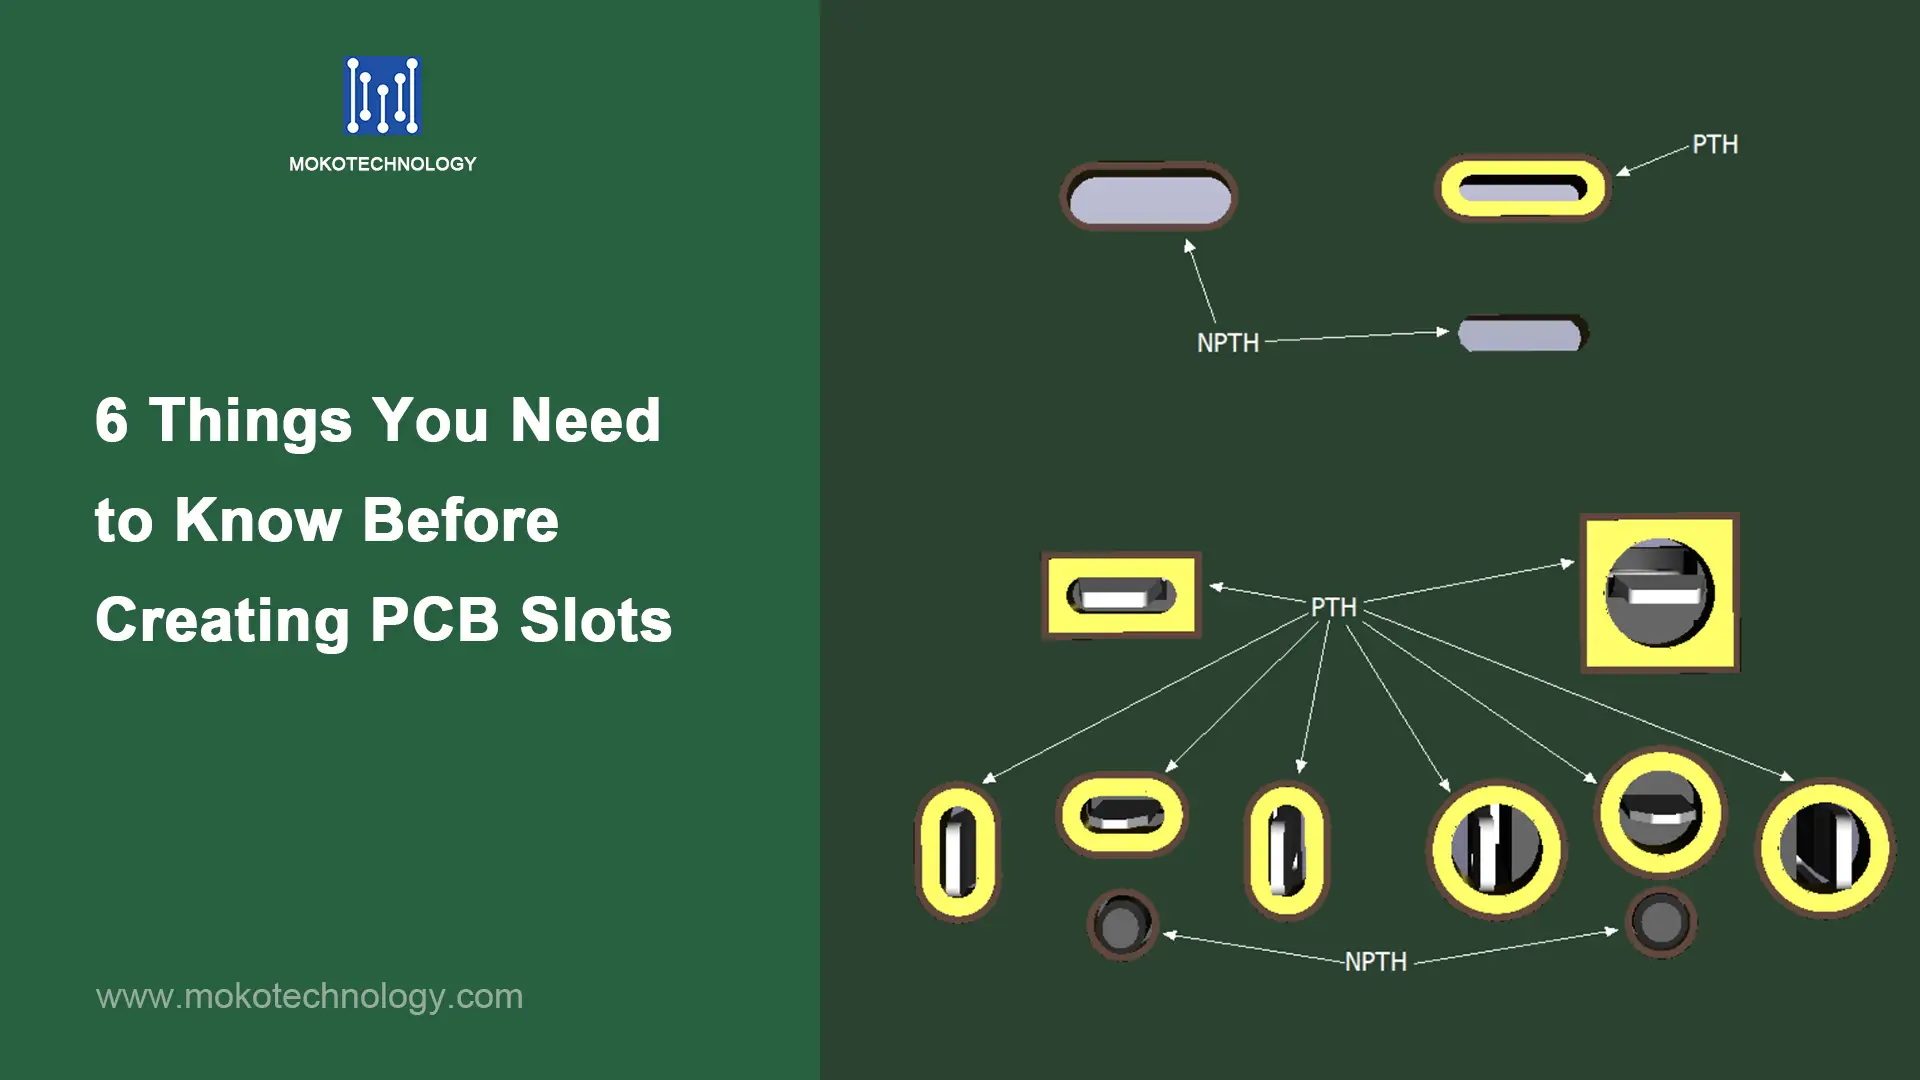 6 Things You Need to Know Before Creating PCB Slots